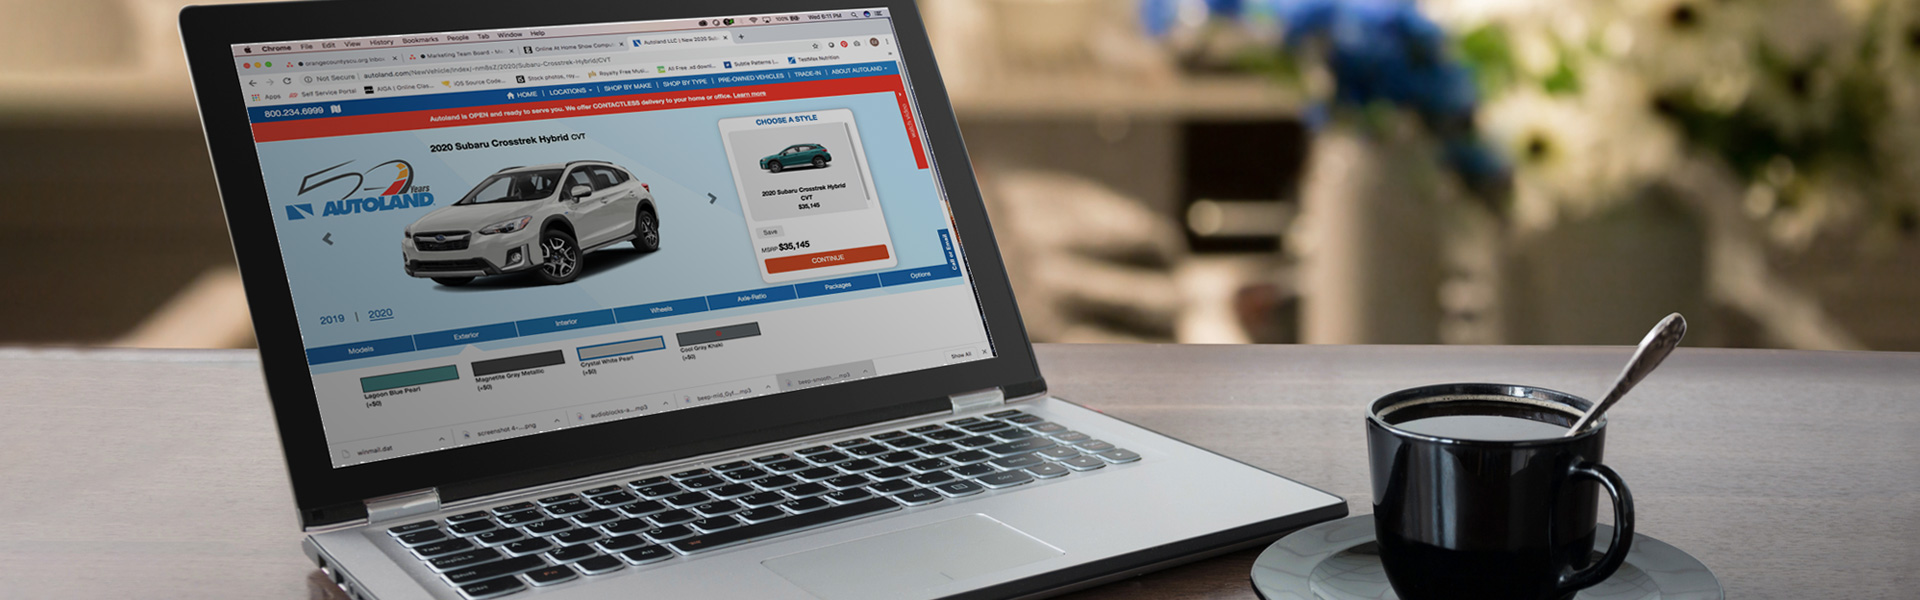 Photo of laptop displaying a car-buying website such as Autoland